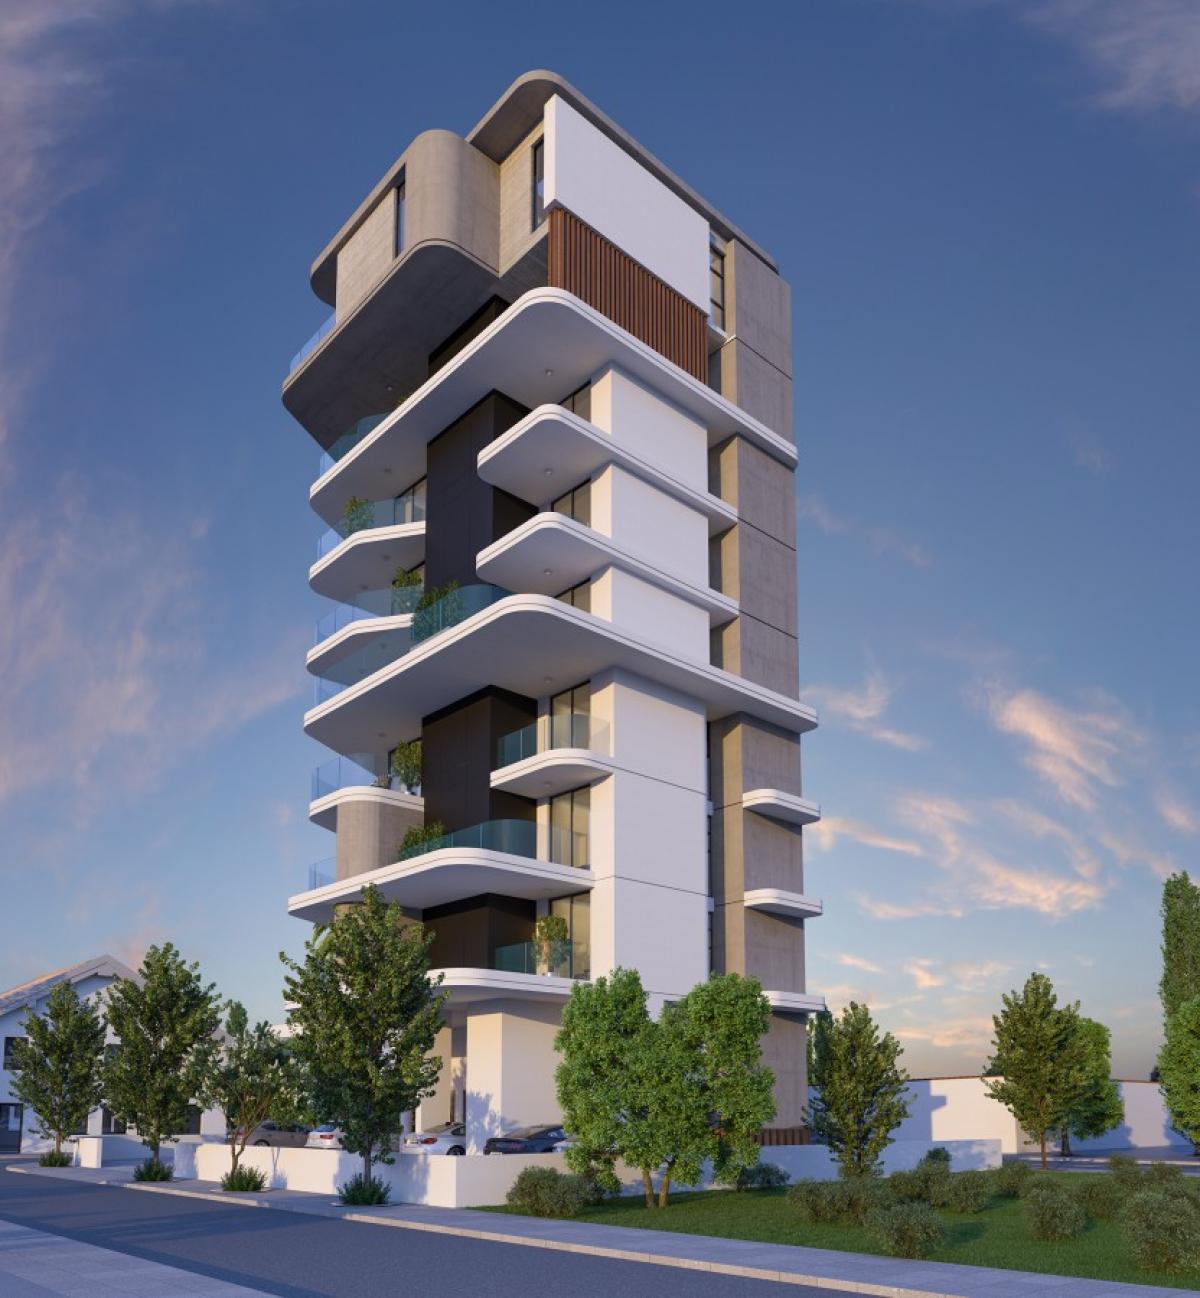 Picture of Condo For Sale in Larnaka - Harbor, Larnaca, Cyprus